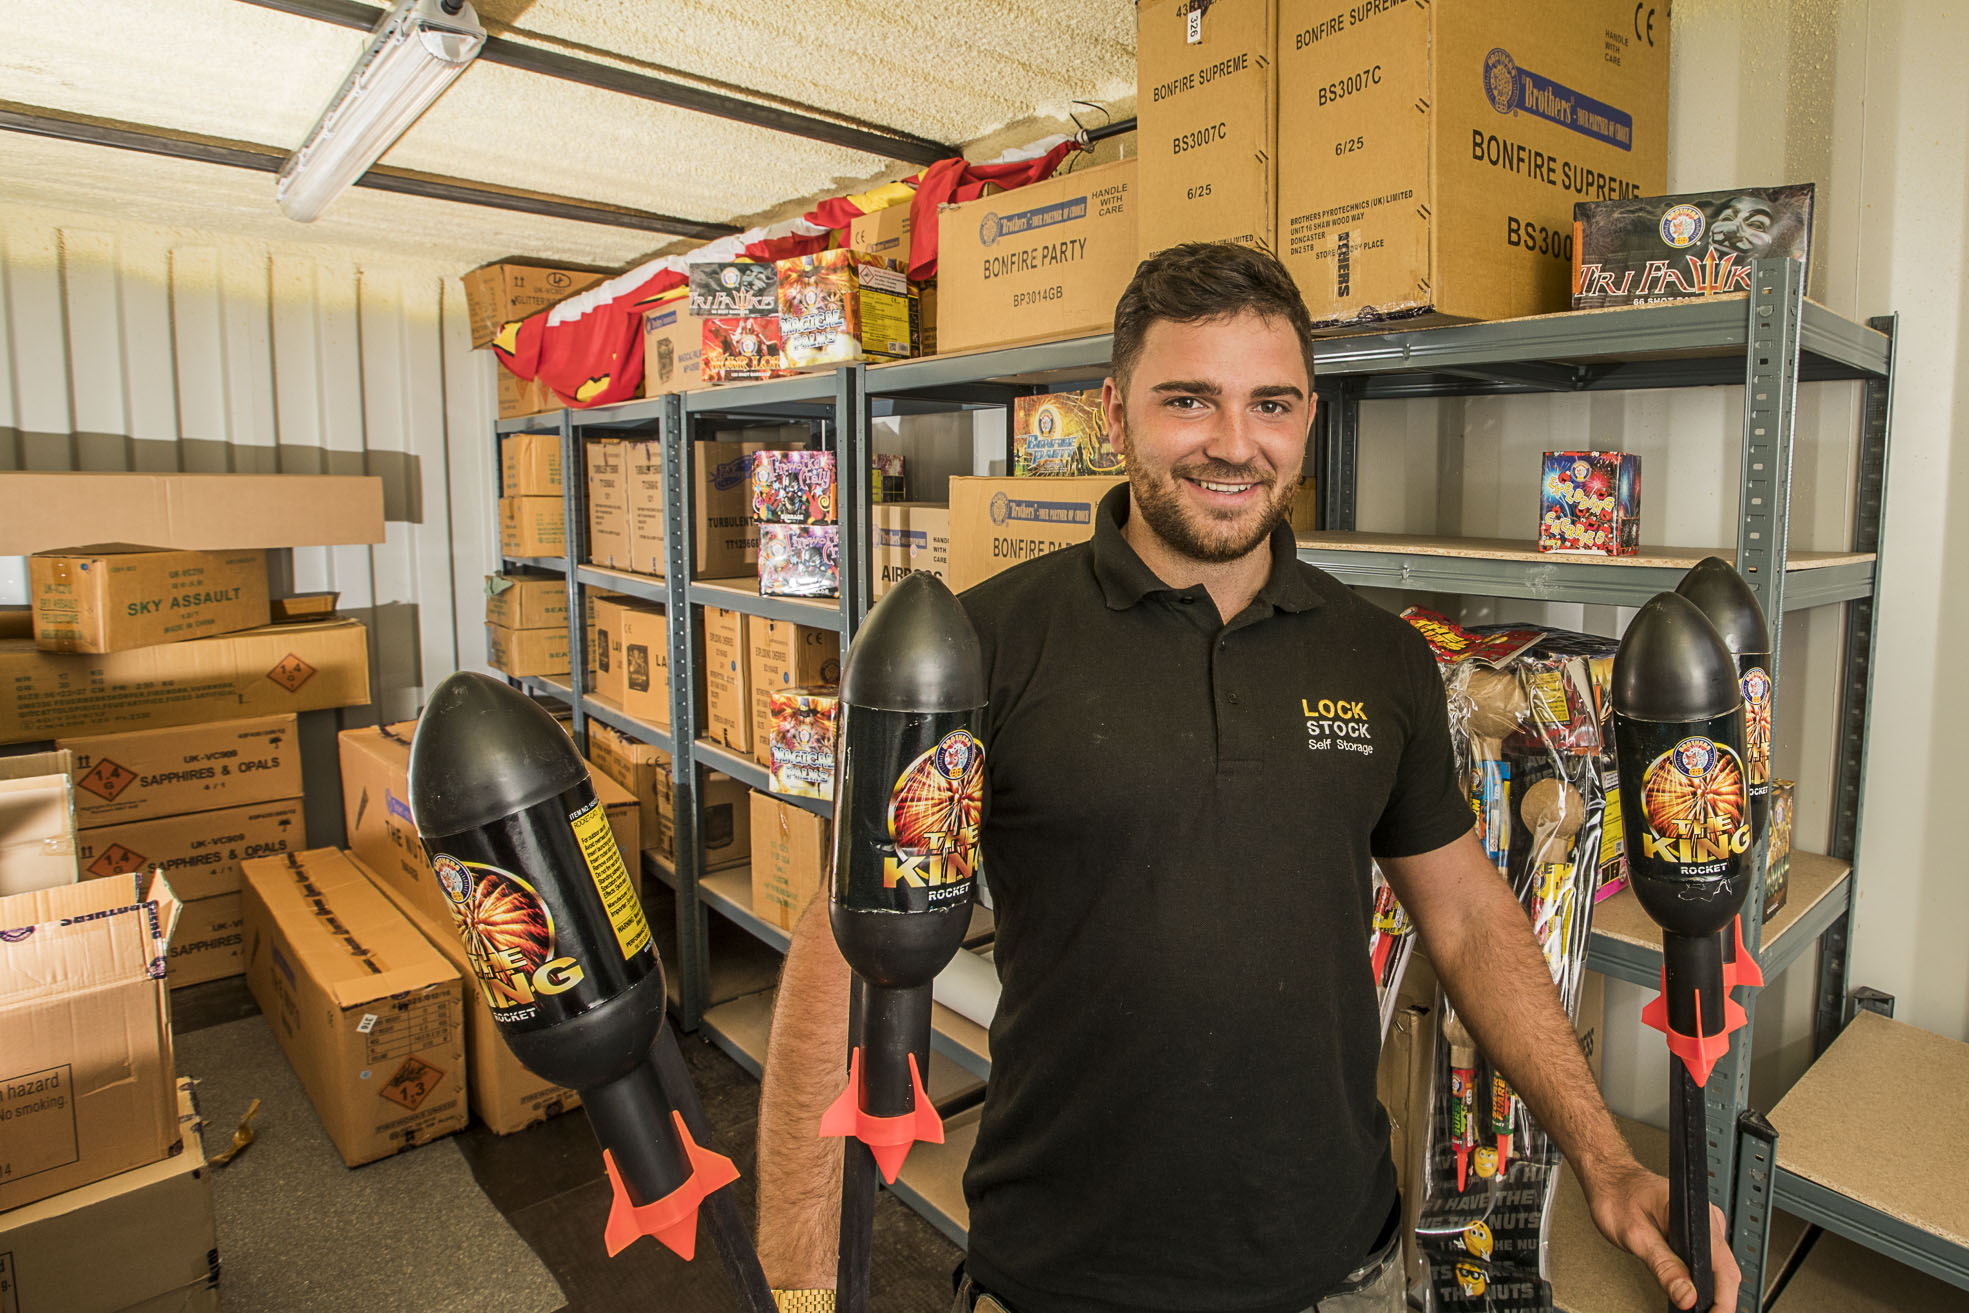 Fireworks aren’t just for November says storage company as sales rocket